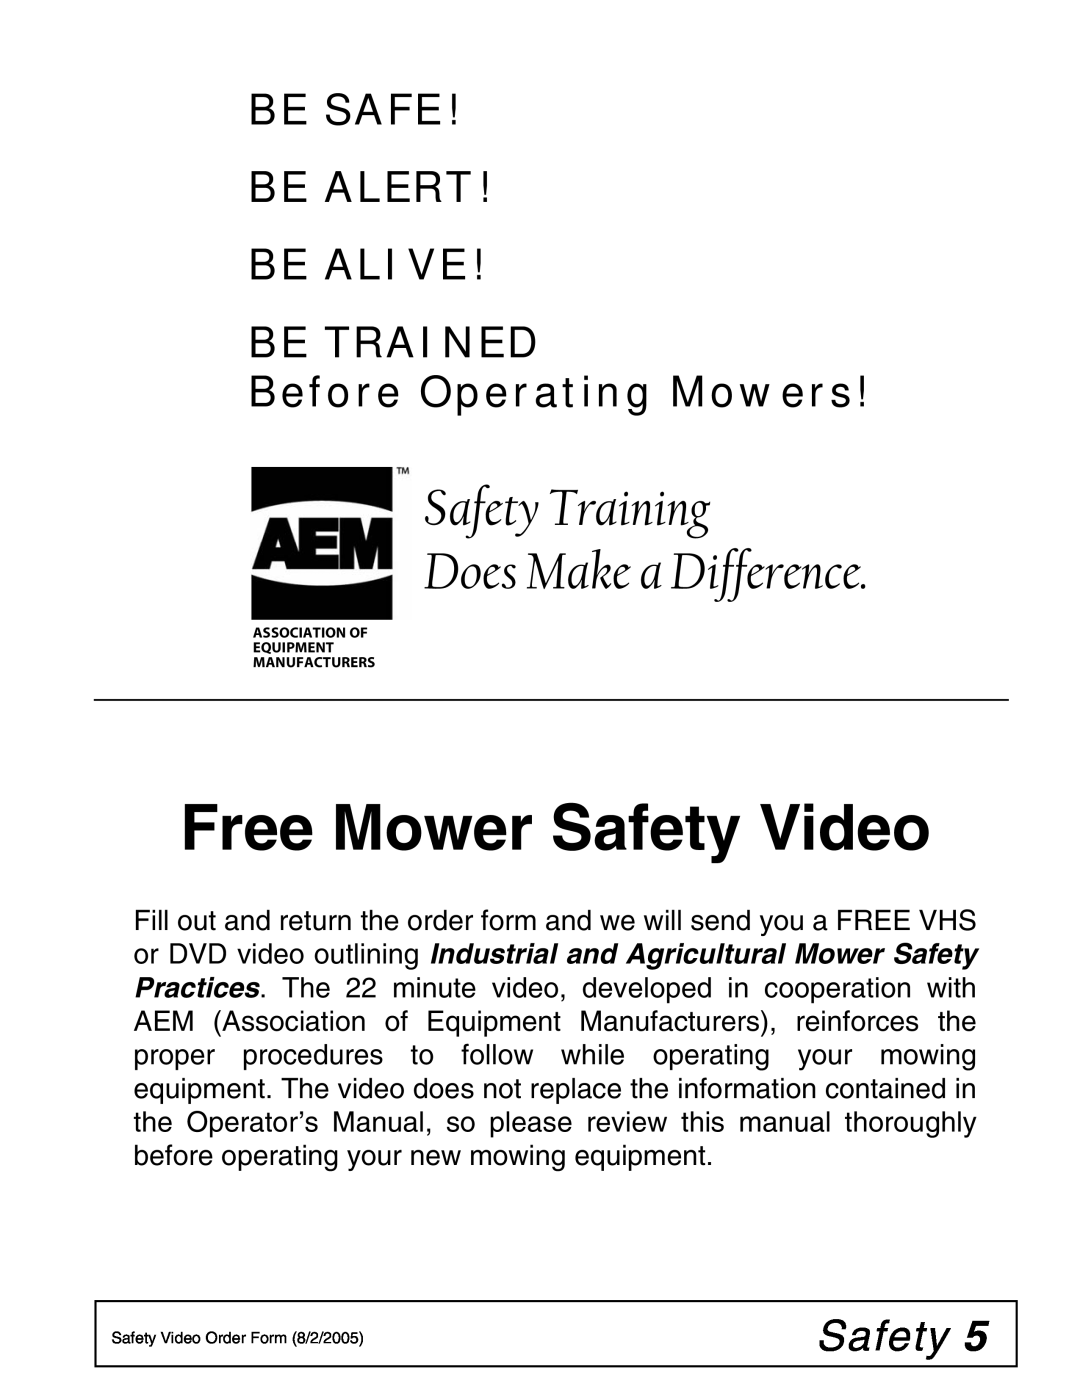 Woods Equipment BW126XQ, BW180XQ manual Free Mower Safety Video, Safety Training Does Make a Difference 